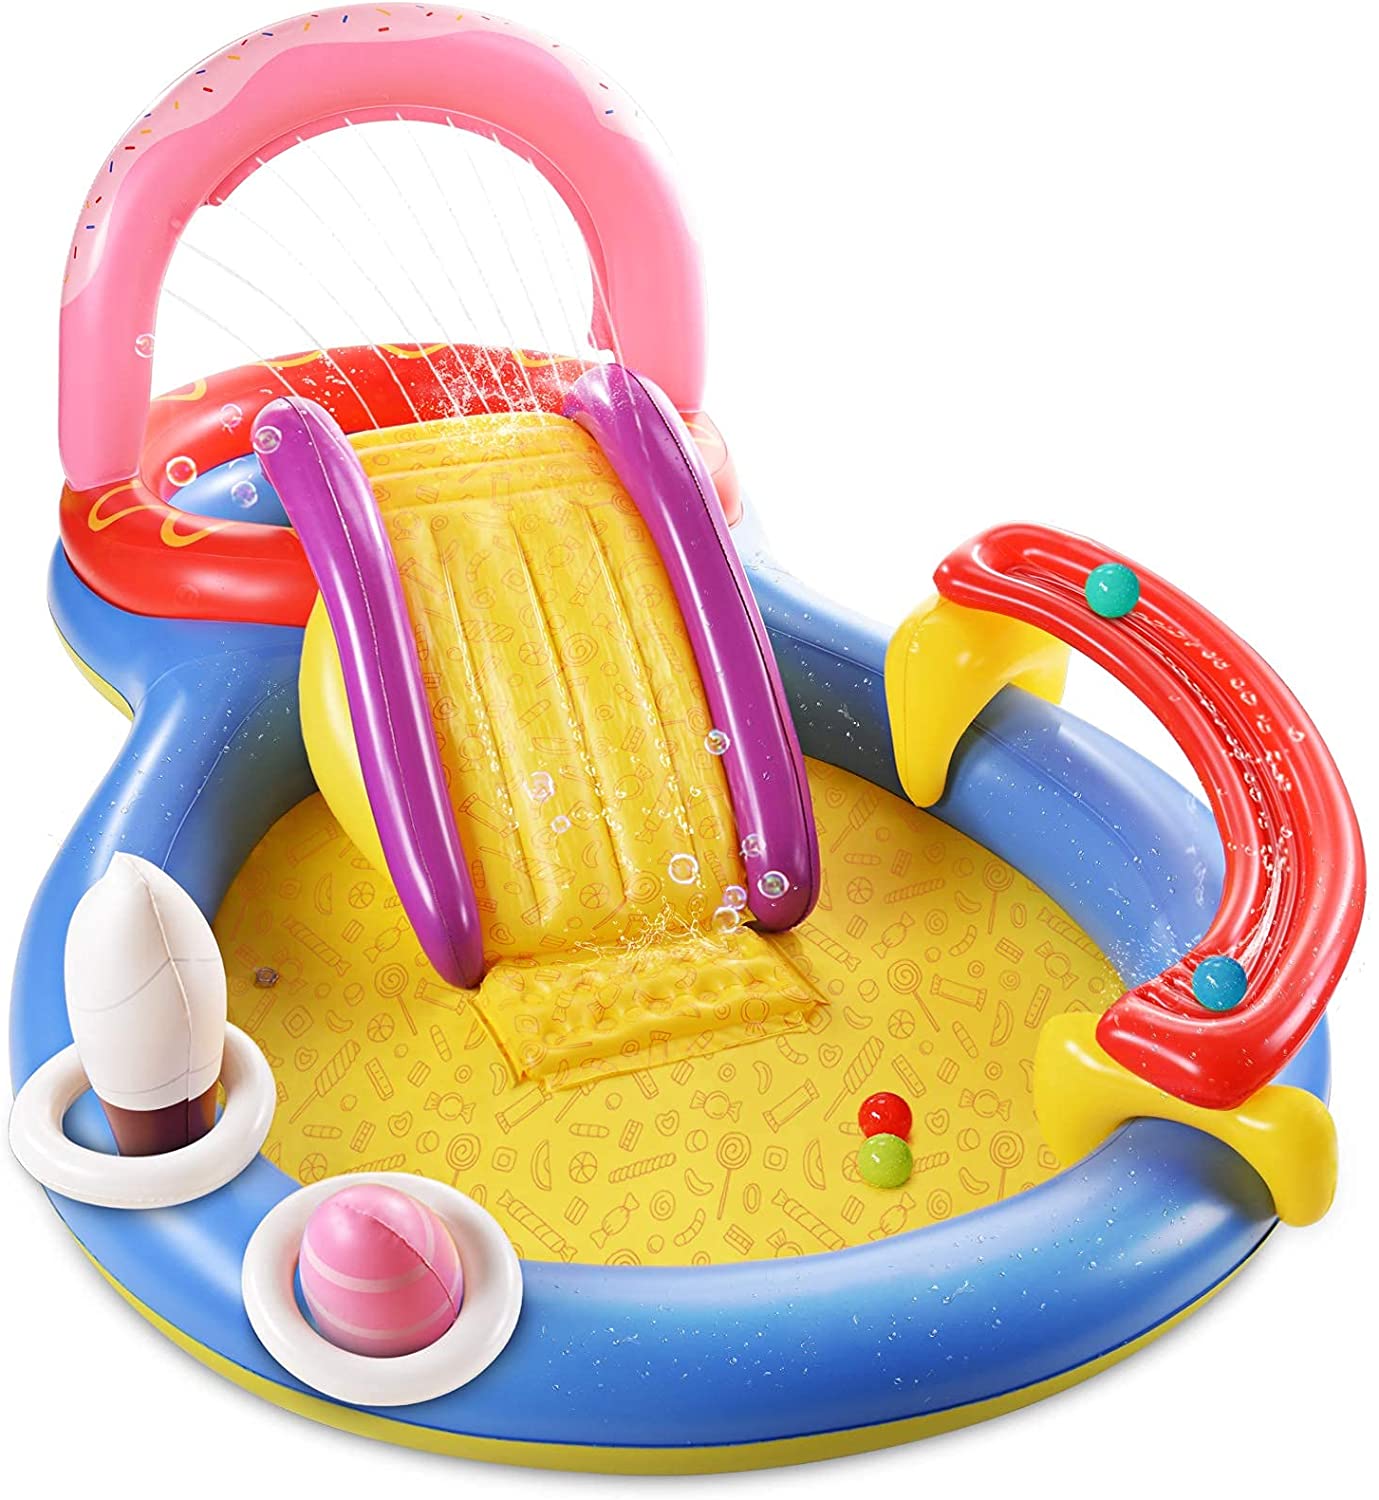 Photo 1 of Inflatable Play Center Hesung 115 X 70 X 44 FullSized Kiddie Pool with Slide Fountain Arch Ball Roller for Toddler Kids Thick WearResistant Big Above Ground Garden Backyard Water Park